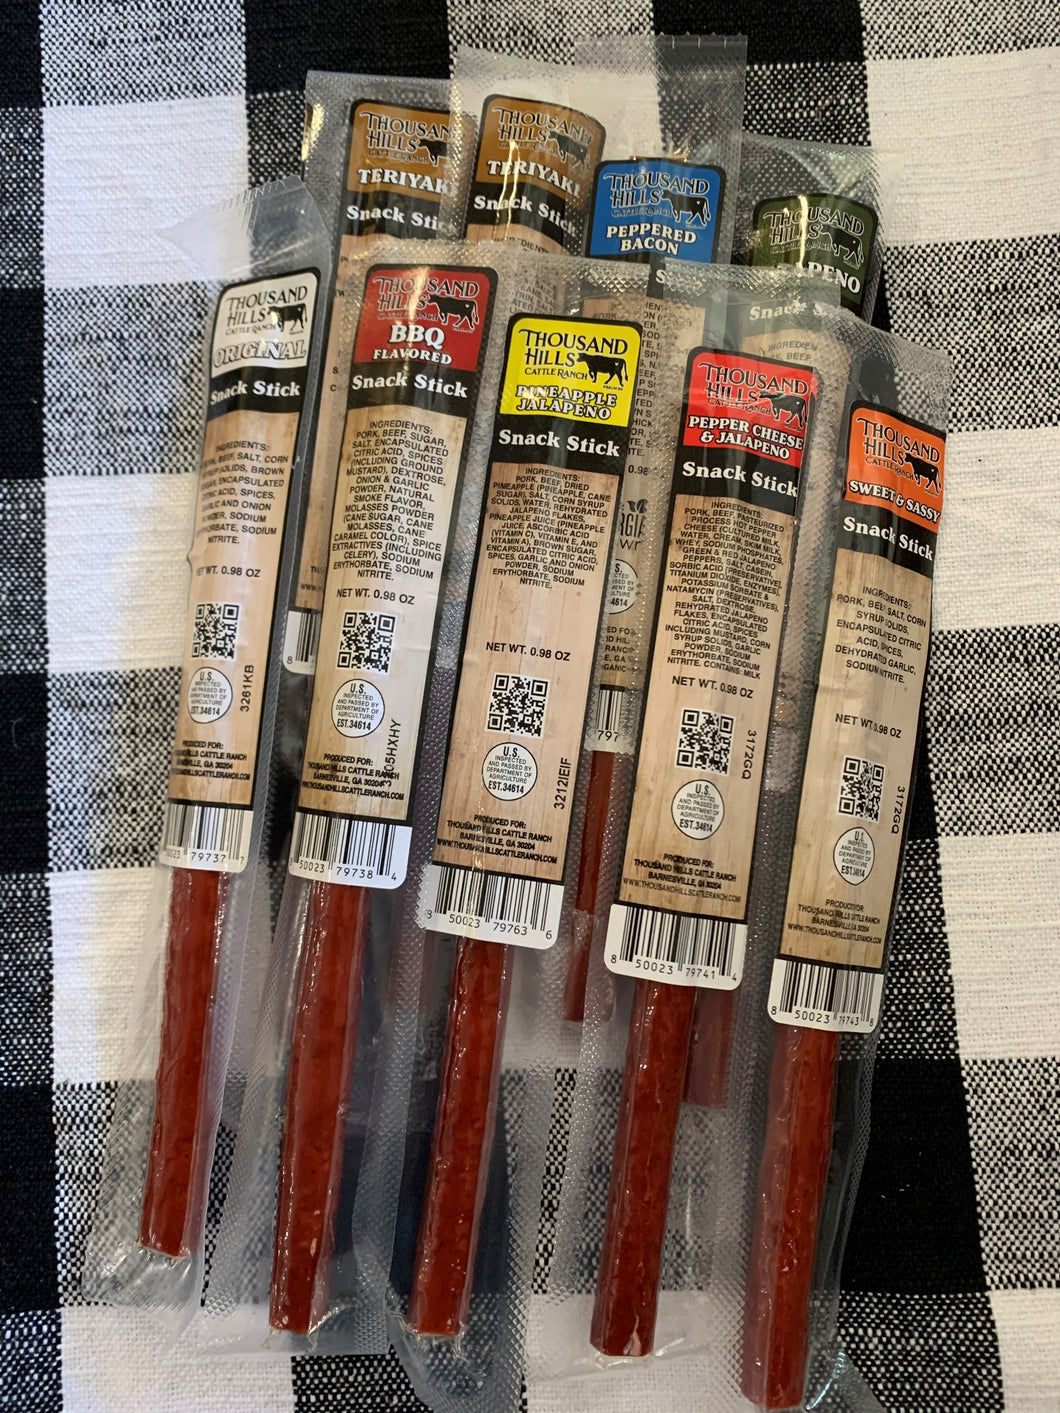 Ready-to-Eat:  Snack Stick Sampler